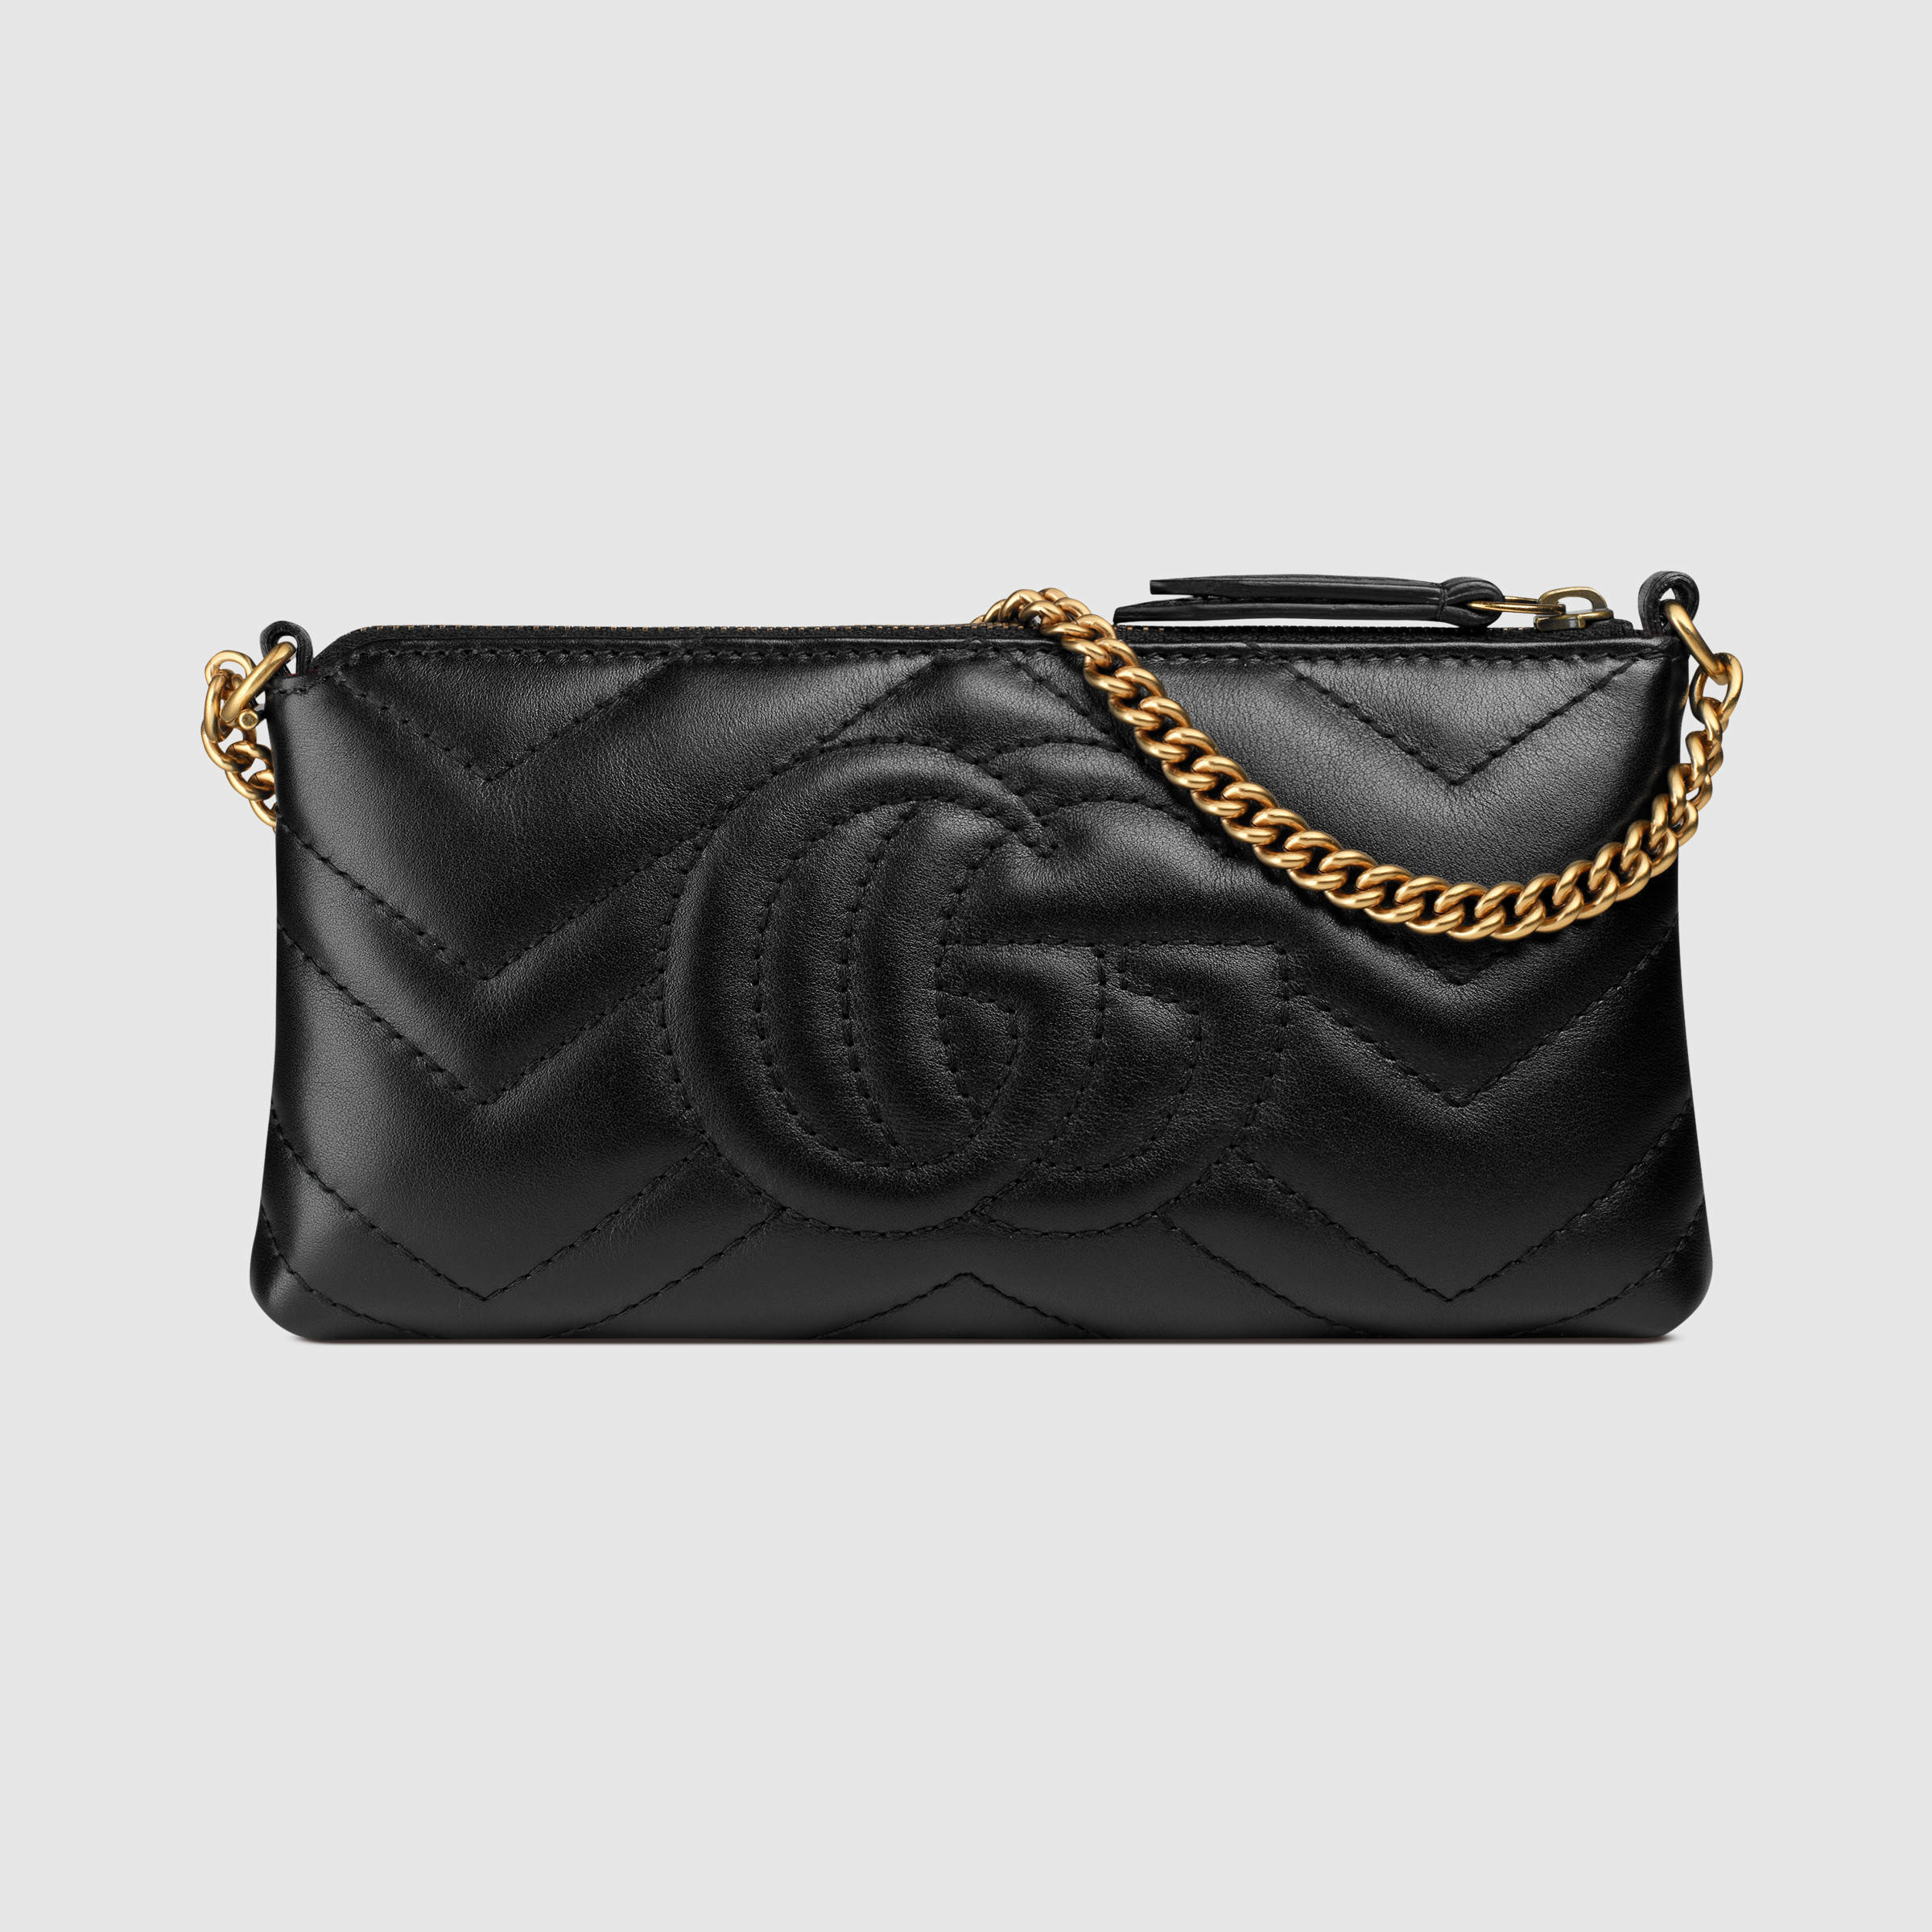 Lyst - Gucci GG Marmont Leather Chain Mini Shoulder Bag in Black